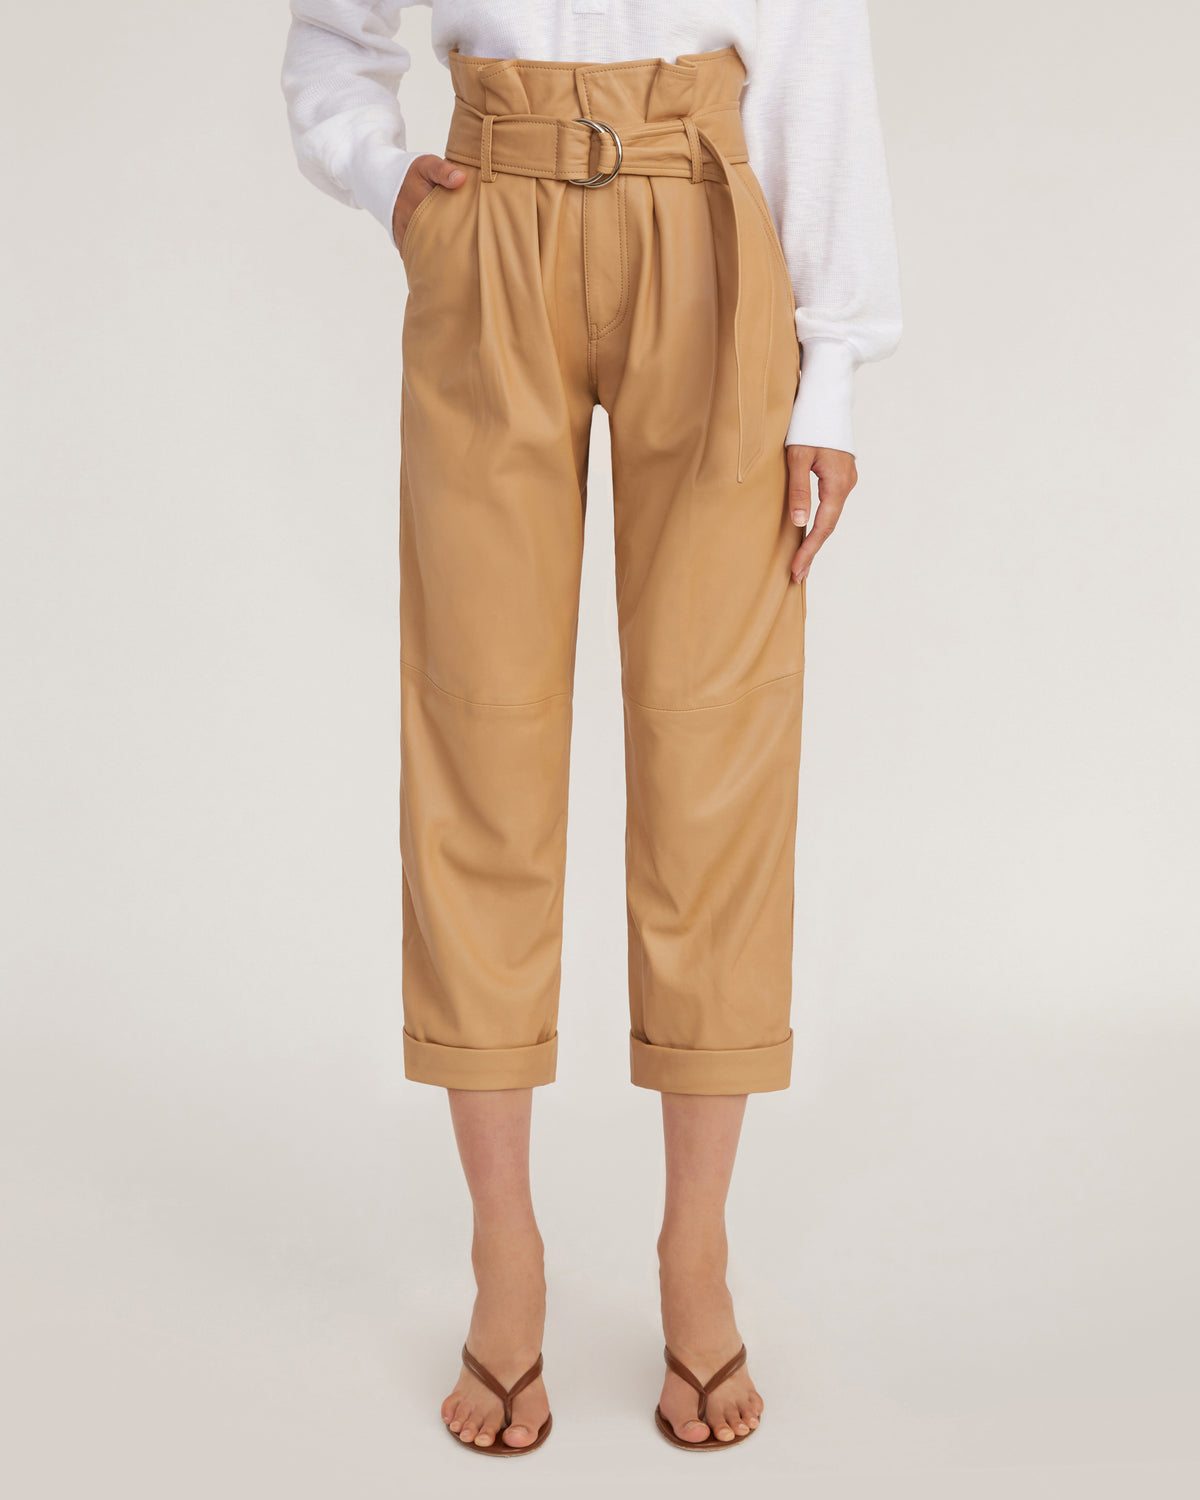 Cotton cigarette trousers with tie-waist, length 30.5